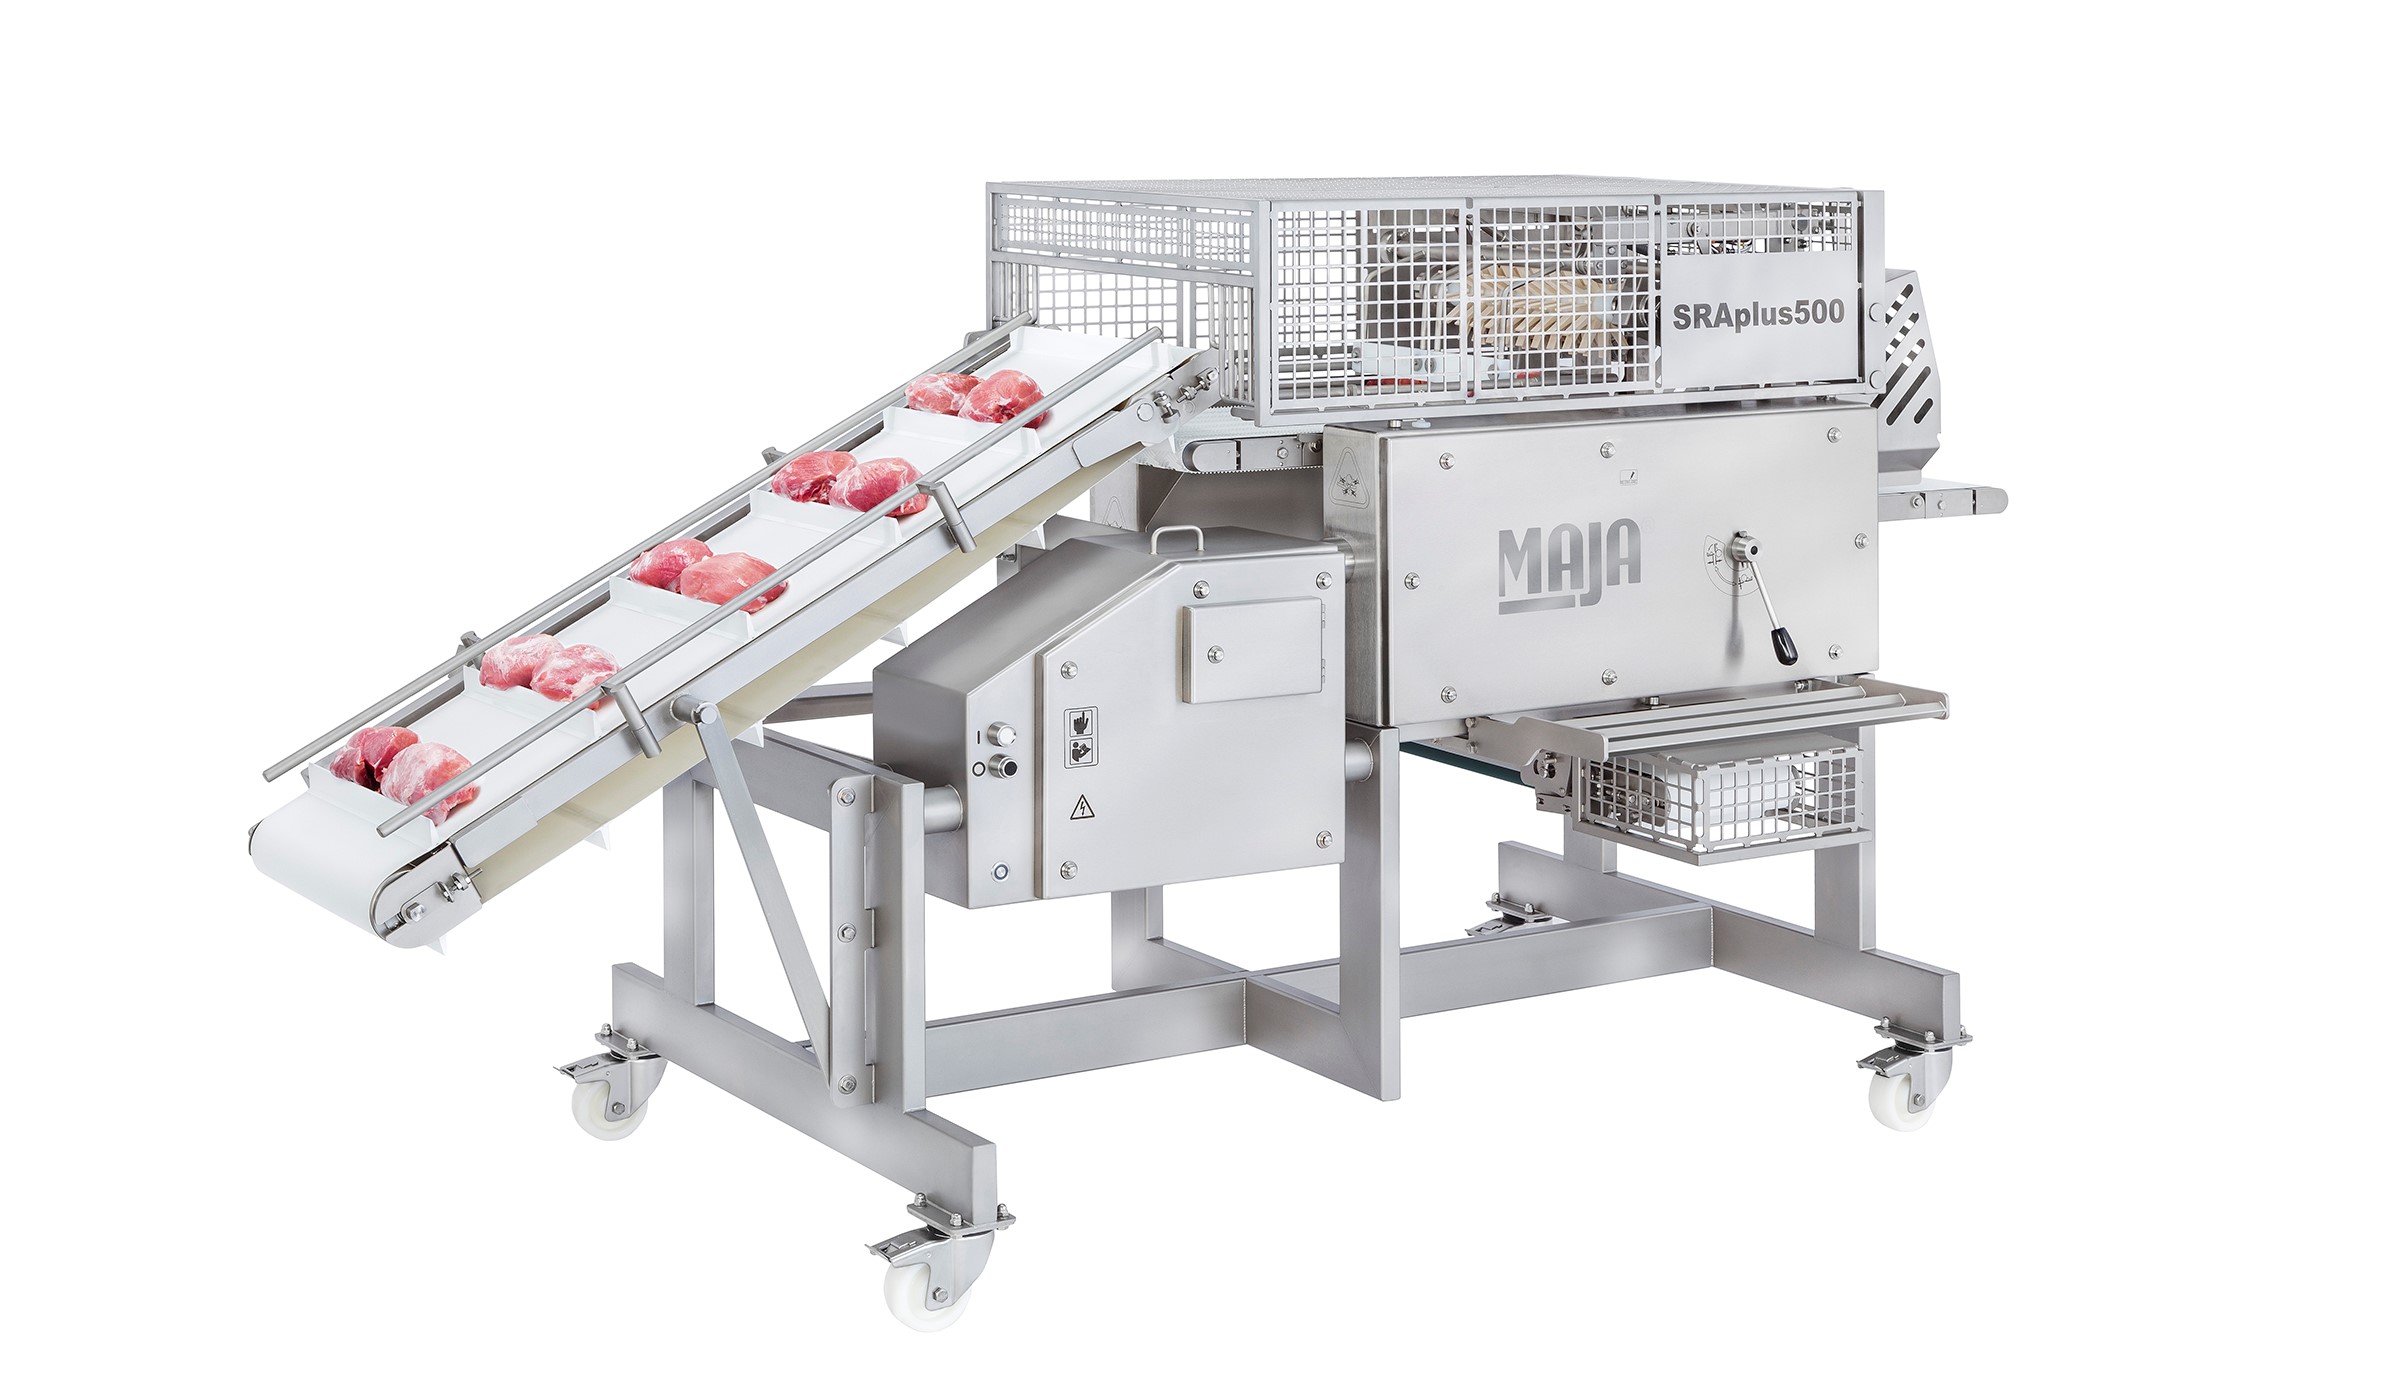 MAJA SRAplus 500 fully automatic membrane skinning of round meat cuts